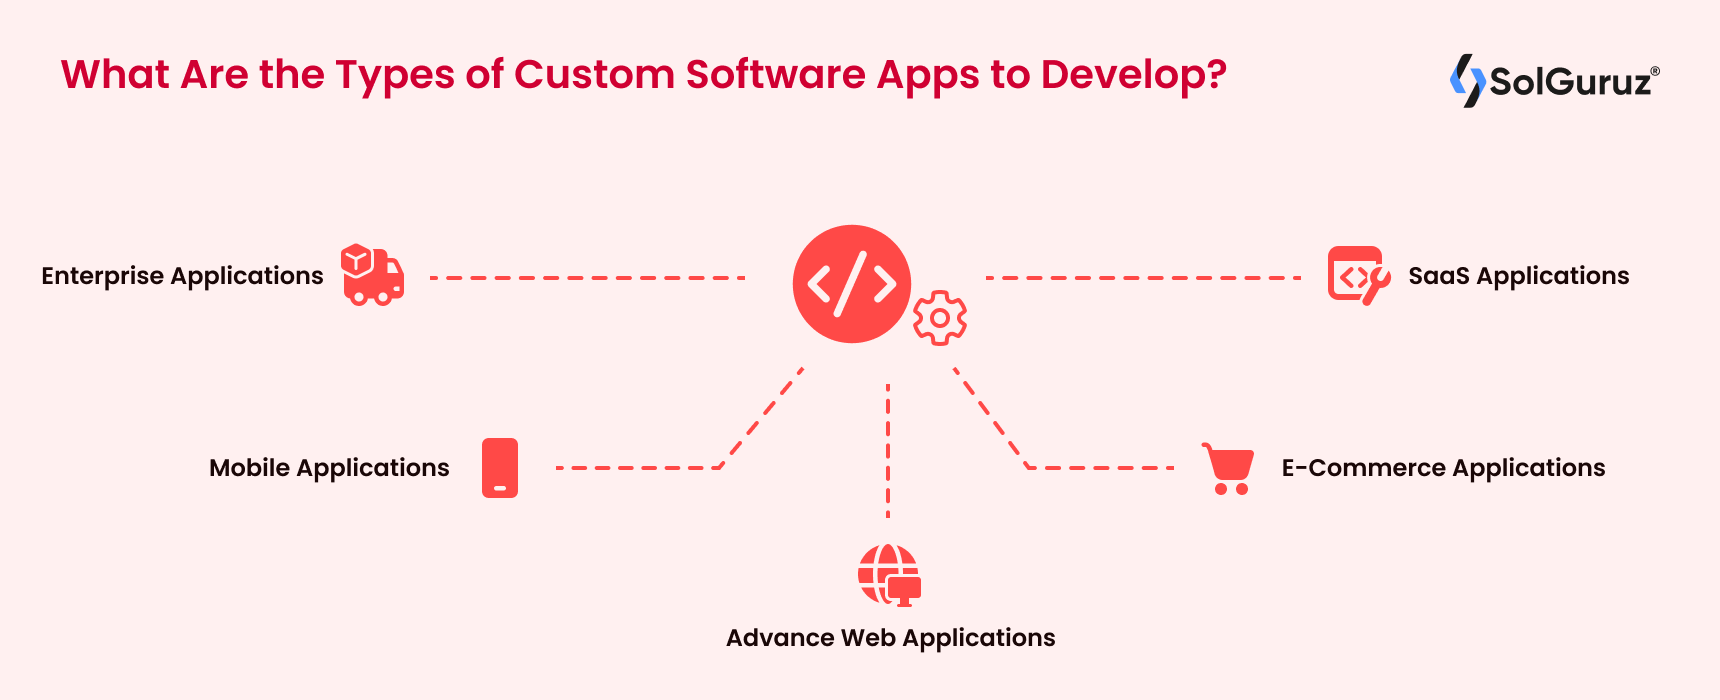 What Are the Types of Custom Software Apps to Develop